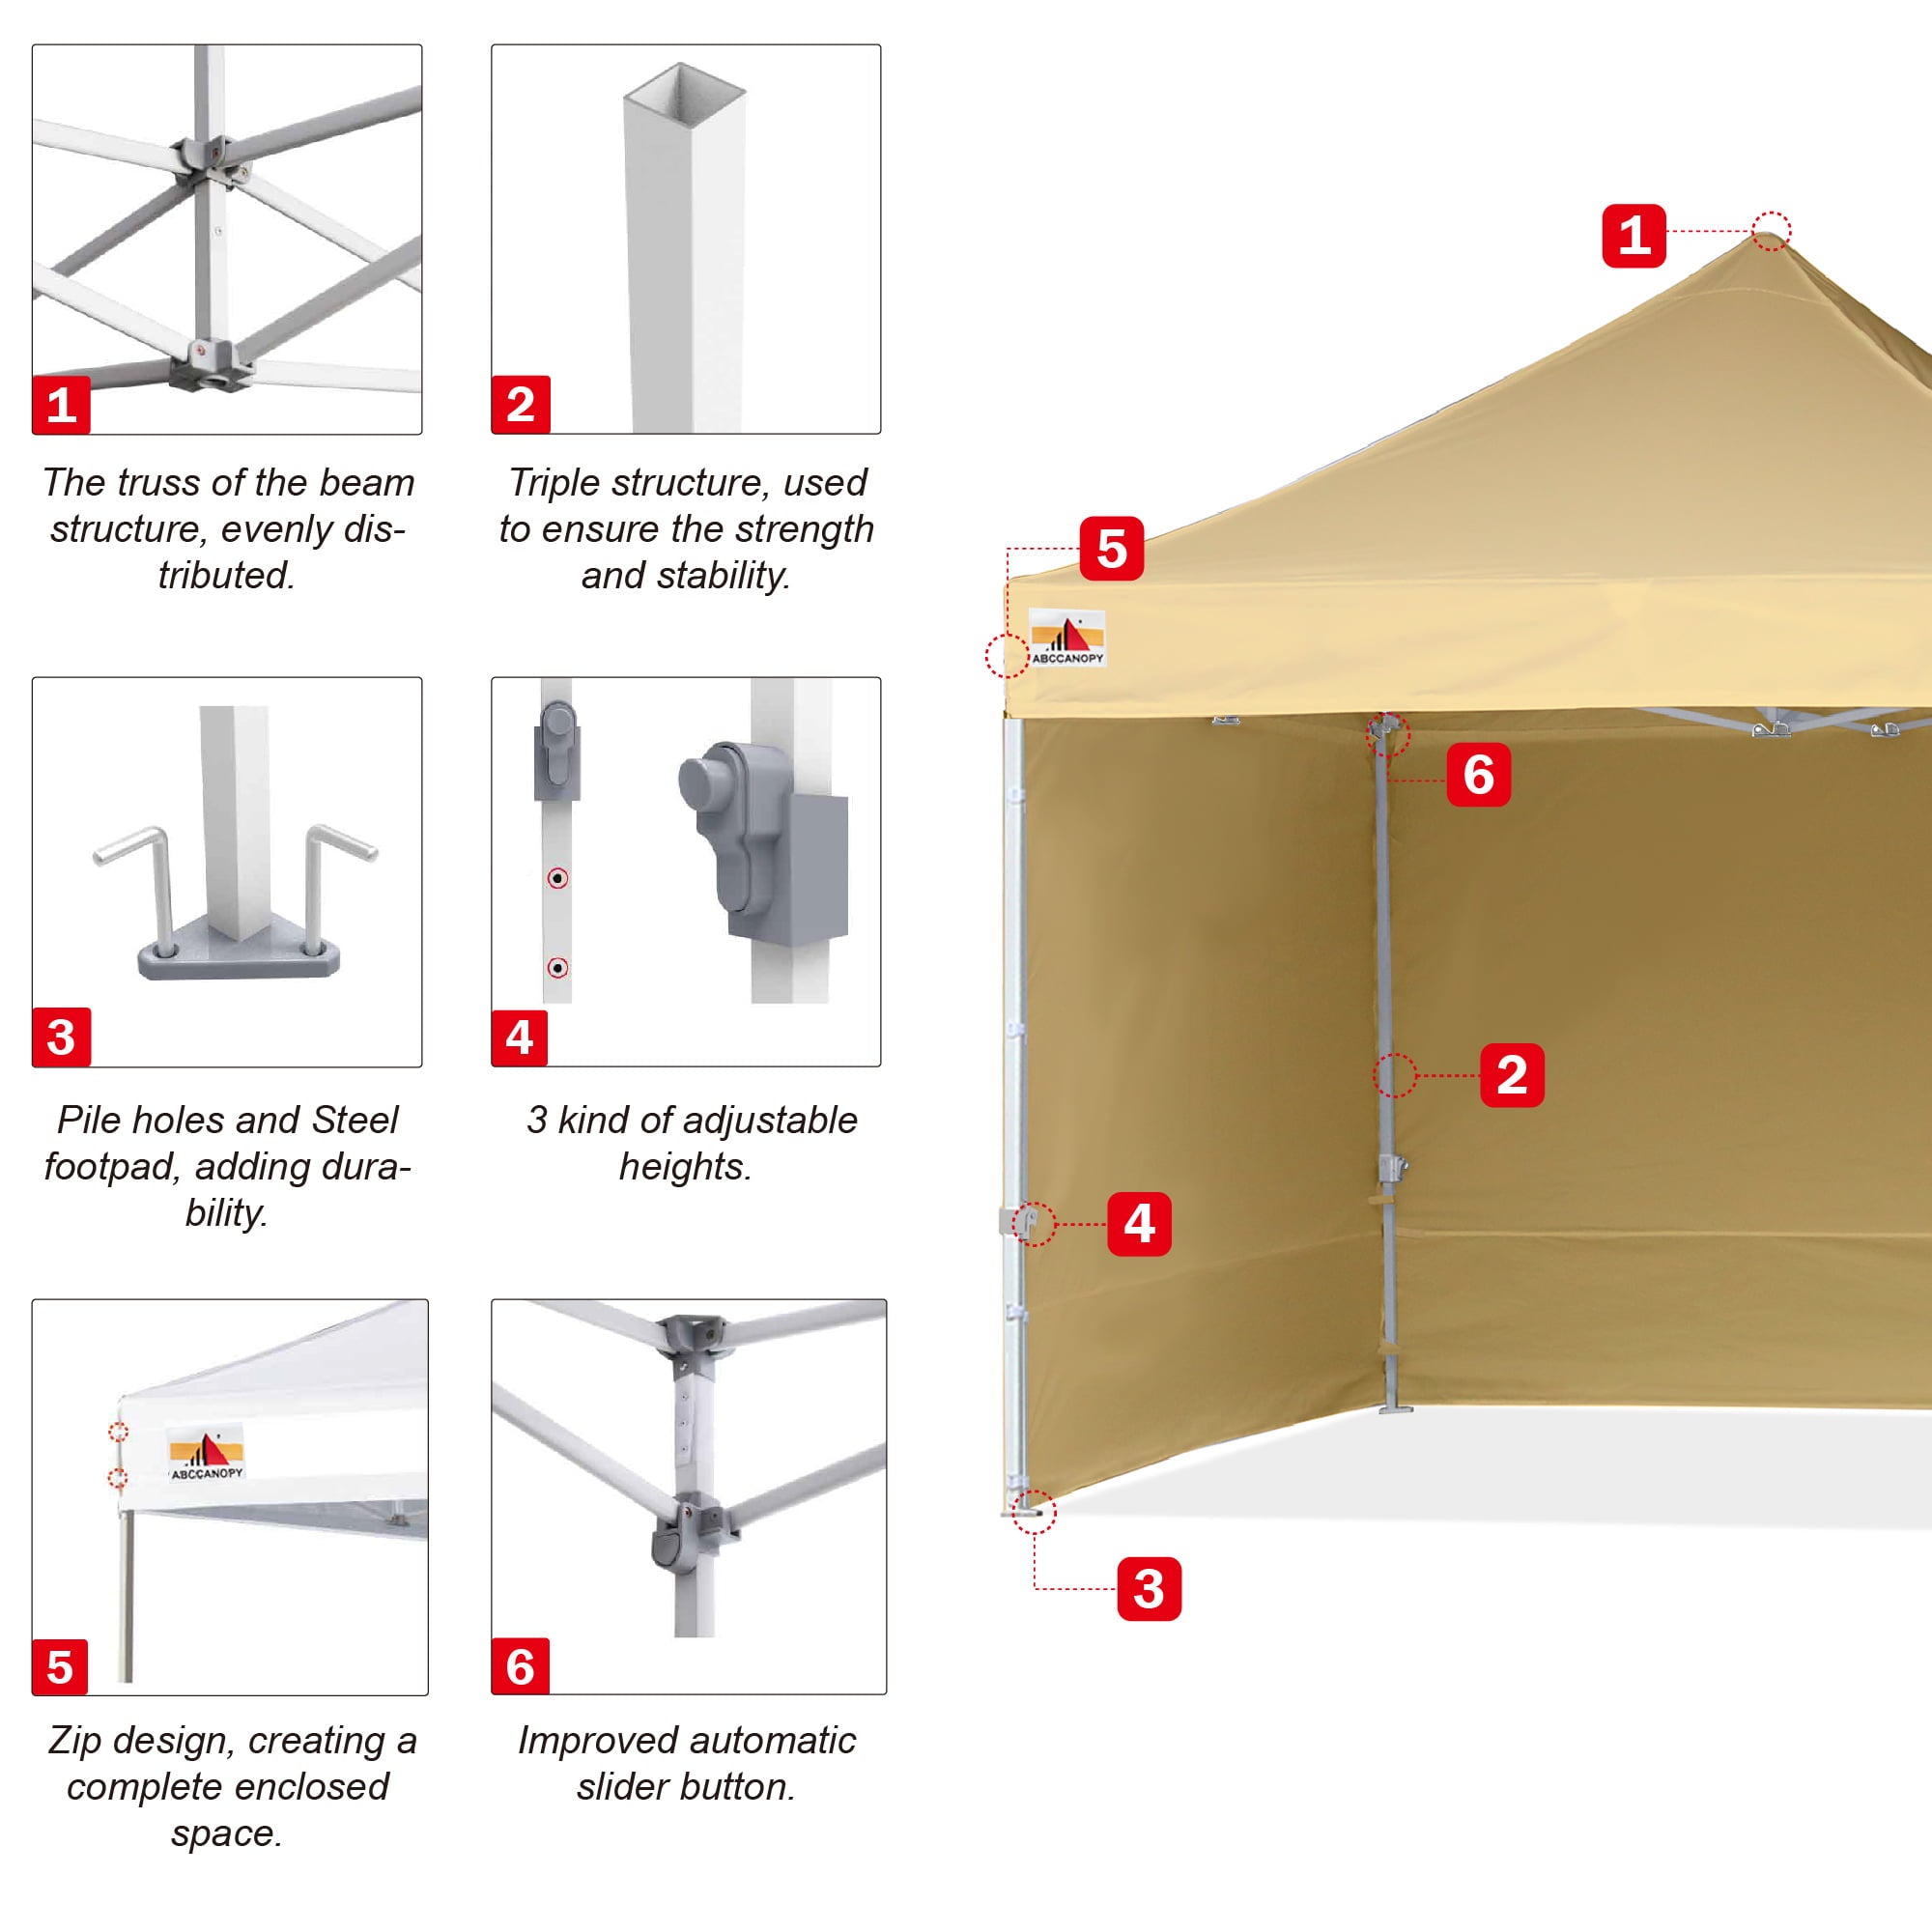 ABCCANOPY 10 ft x 10 ft Metal Pop-Up Commercial Canopy Tent with walls, Beige